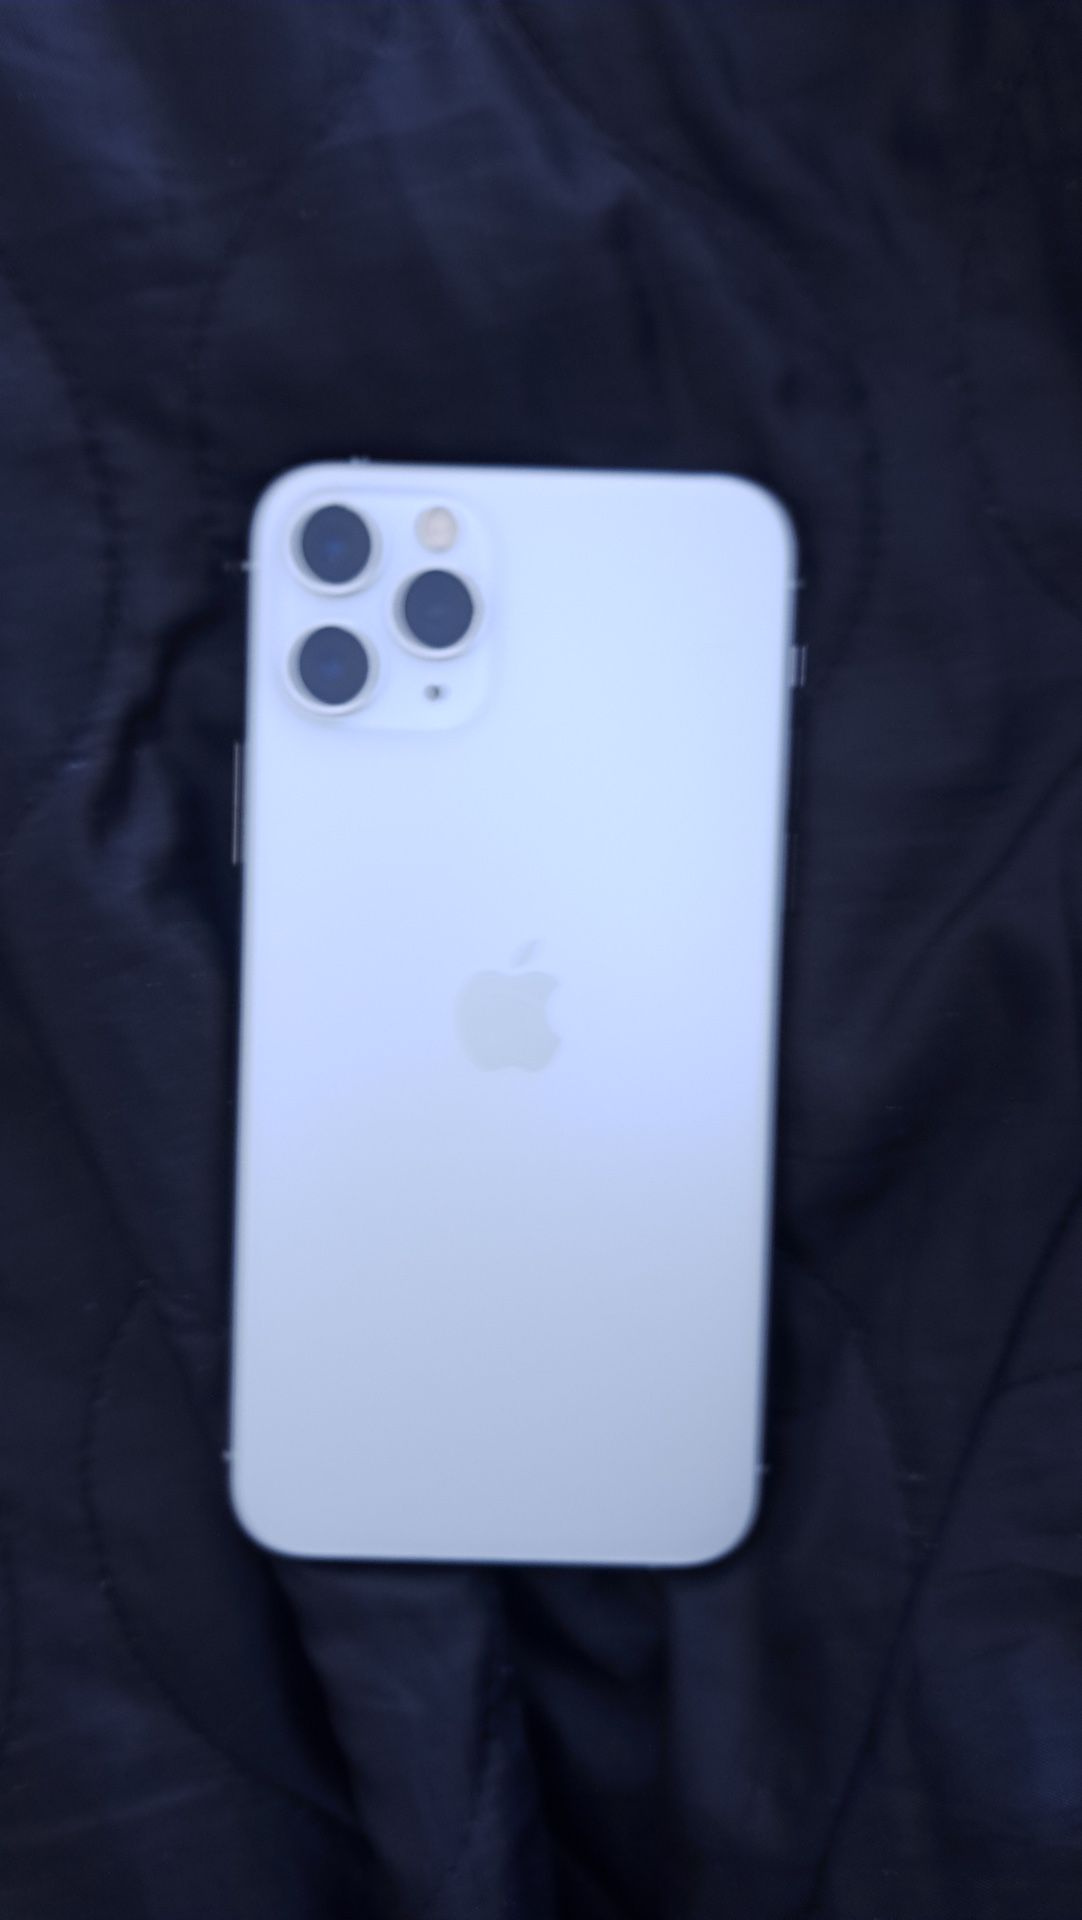 iPhone 11 Pro Silver 256 GB Any Carrier or Network Unlocked Any Sim Card! 3 Months Unlimited Service Included Started  4/28/24